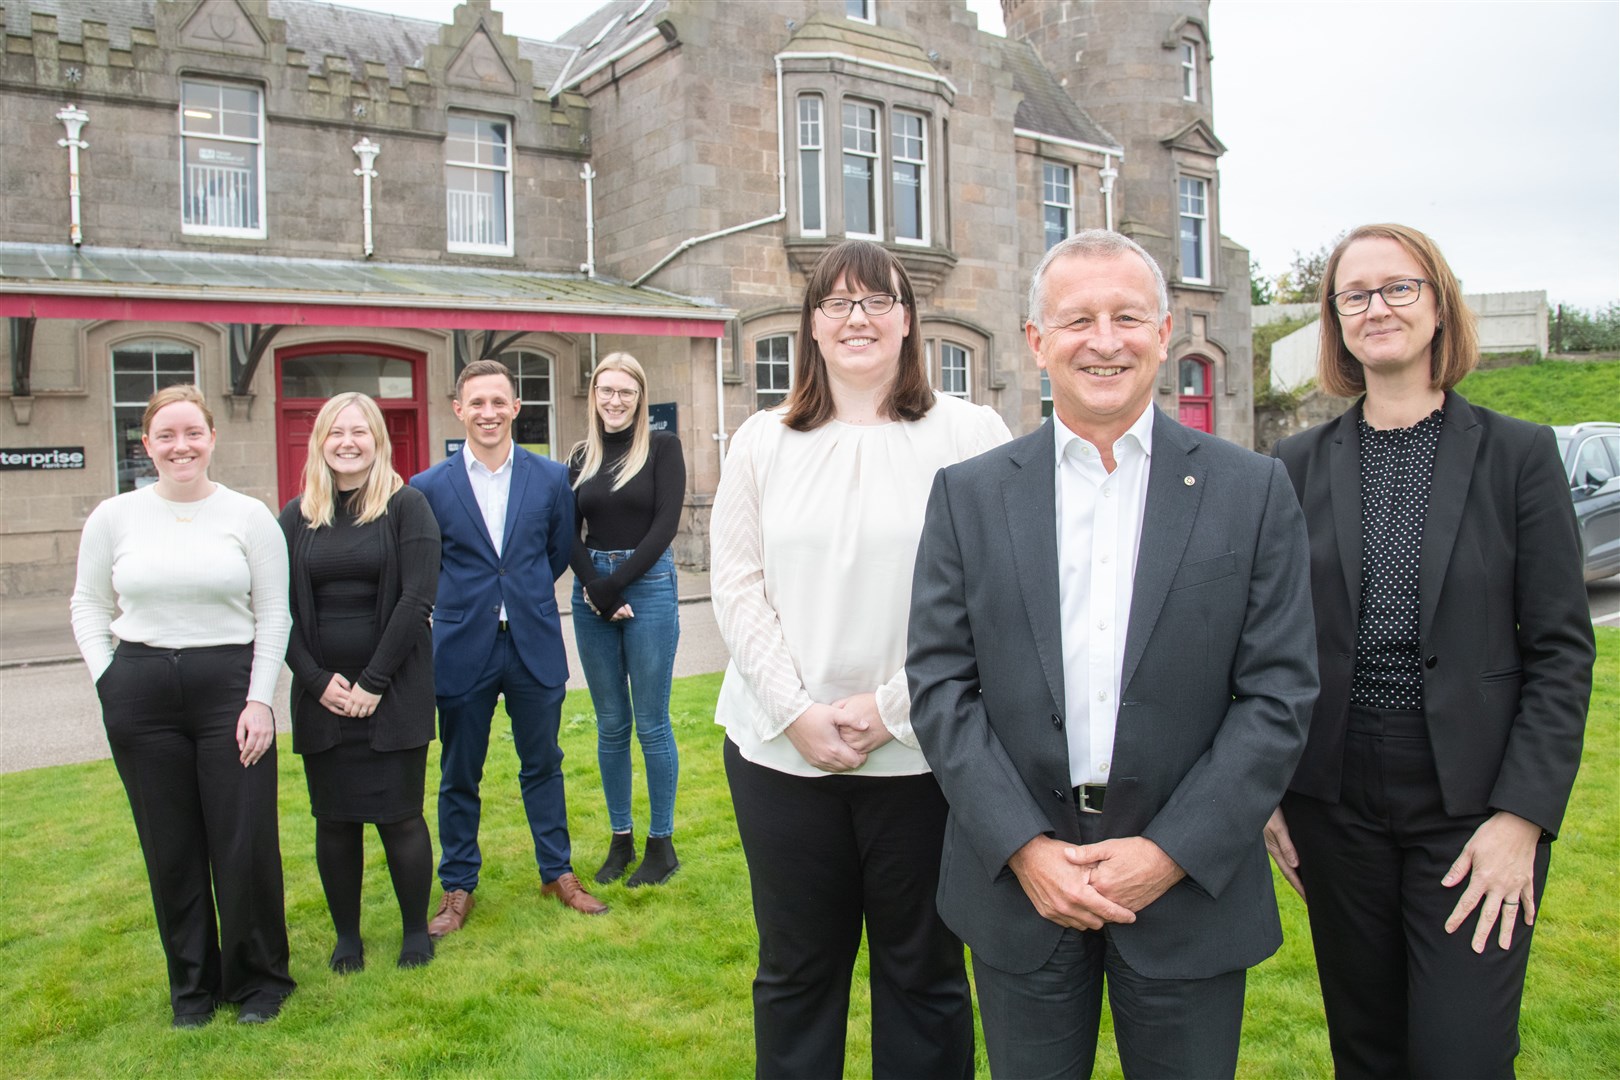 Ian Davidson (front), with the team at Harper McLeod in Elgin, from left, Erin Morrison (trainee solicitor), Lauryn McLean (paralegal), Will Davidson (solicitor), Eilidh Johnston (team assistant), Nicola Stephen (senior associate) Laura McLean (partner - family law). Picture: Daniel Forsyth